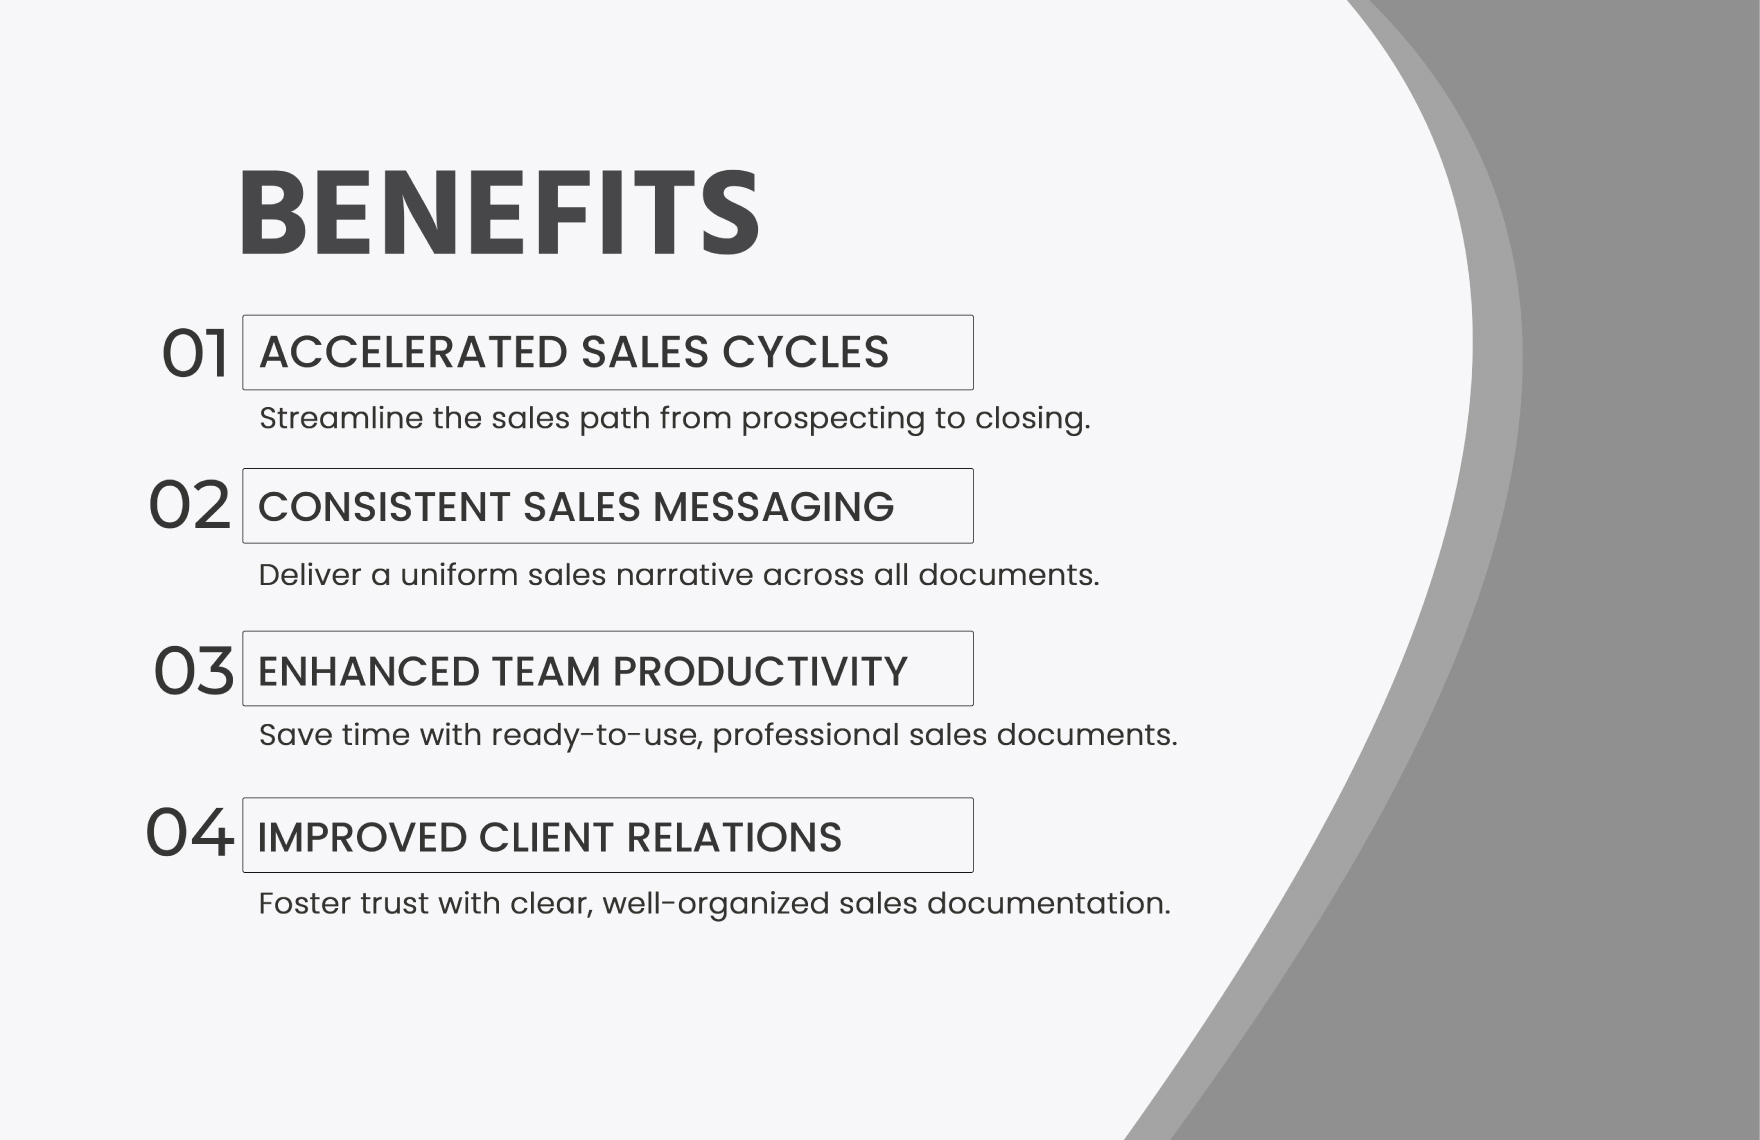 Sales Resolution for Contractual Disputes Template